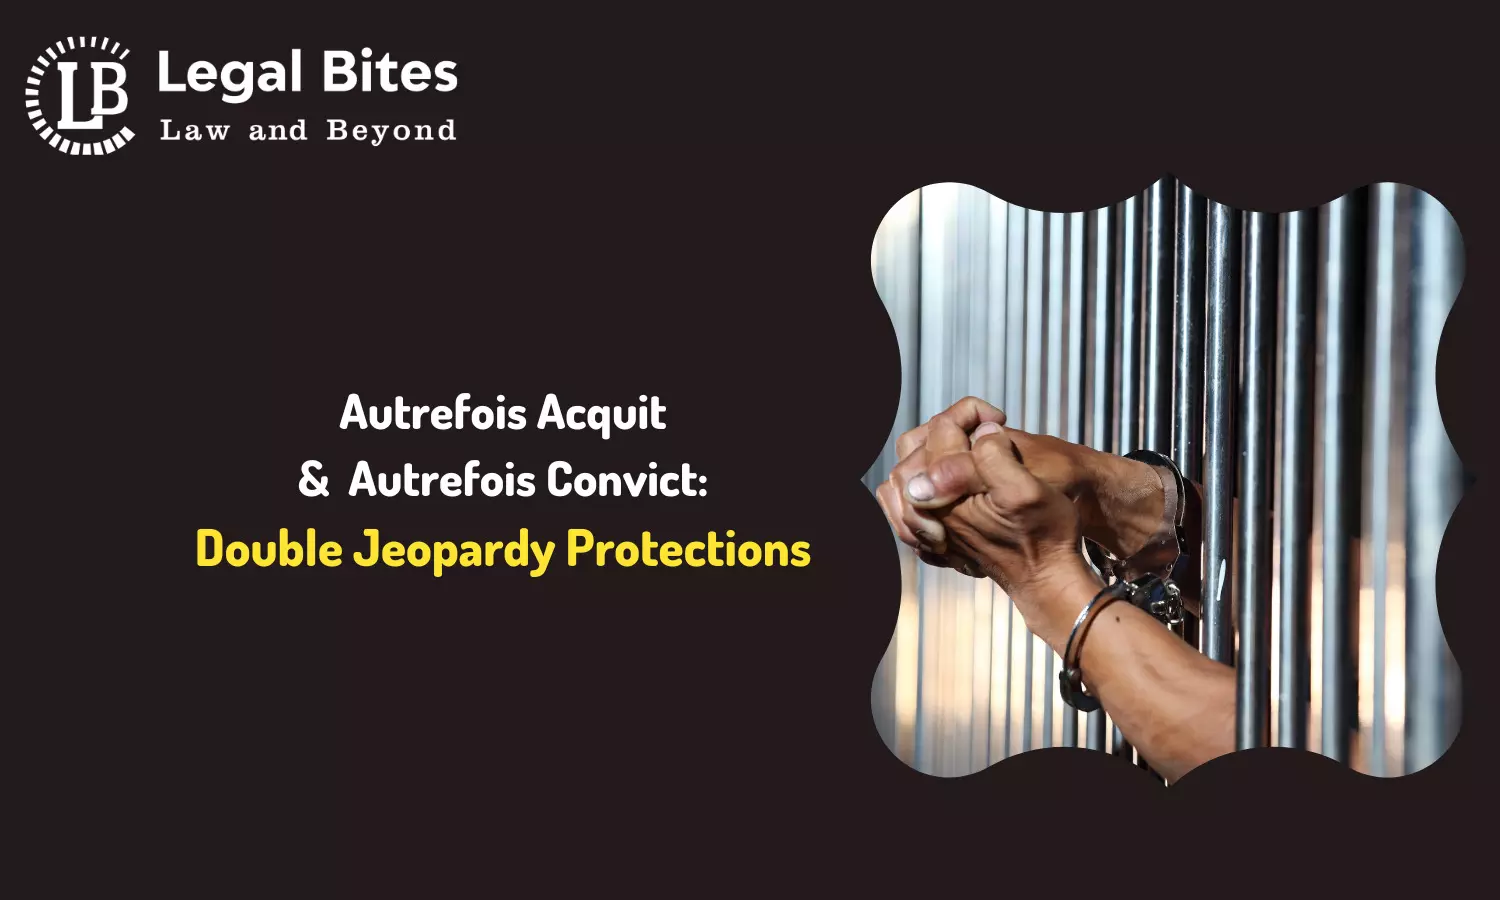 Doctrine of Autrefois Acquit and Autrefois Convict: Double Jeopardy Protections in Law